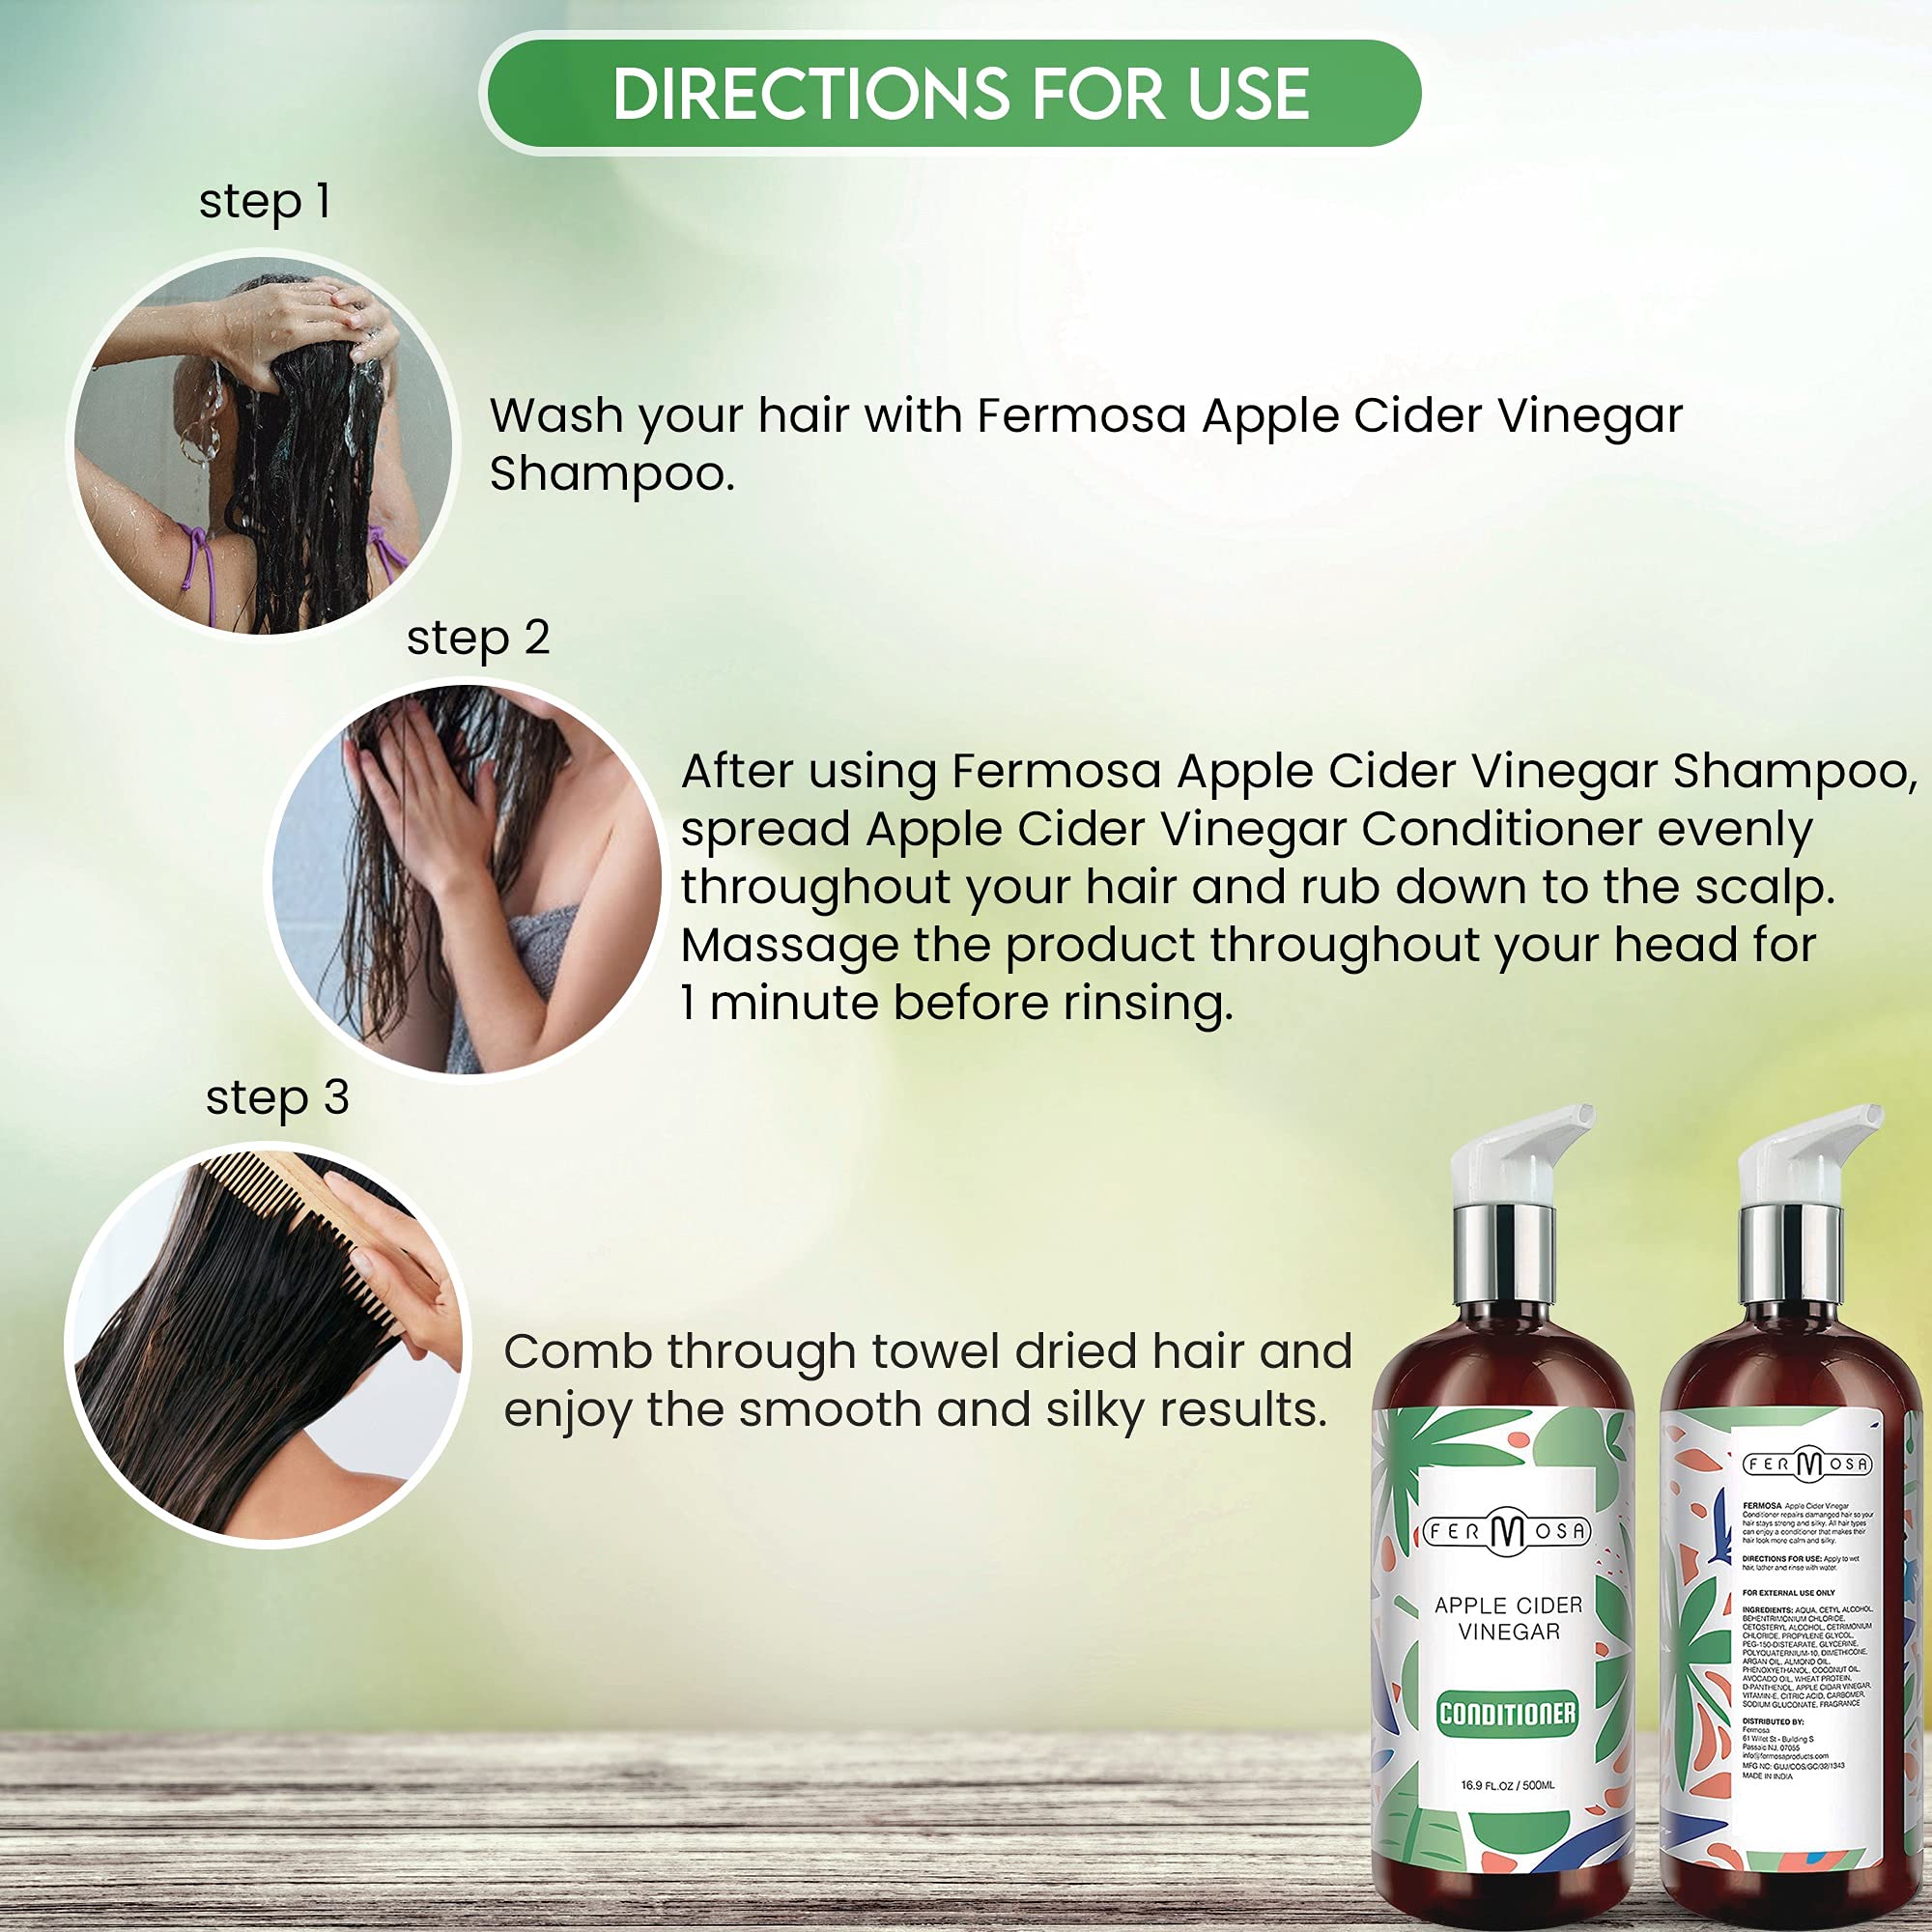 Fermosa Apple Cider Vinegar Conditioner - Moisturizing & Soothing Scalp Treatment, Anti Dandruff, Reduces Itchiness & Frizz, Adds Shine & Volume, Sulfate Free, 16.9oz/500ml